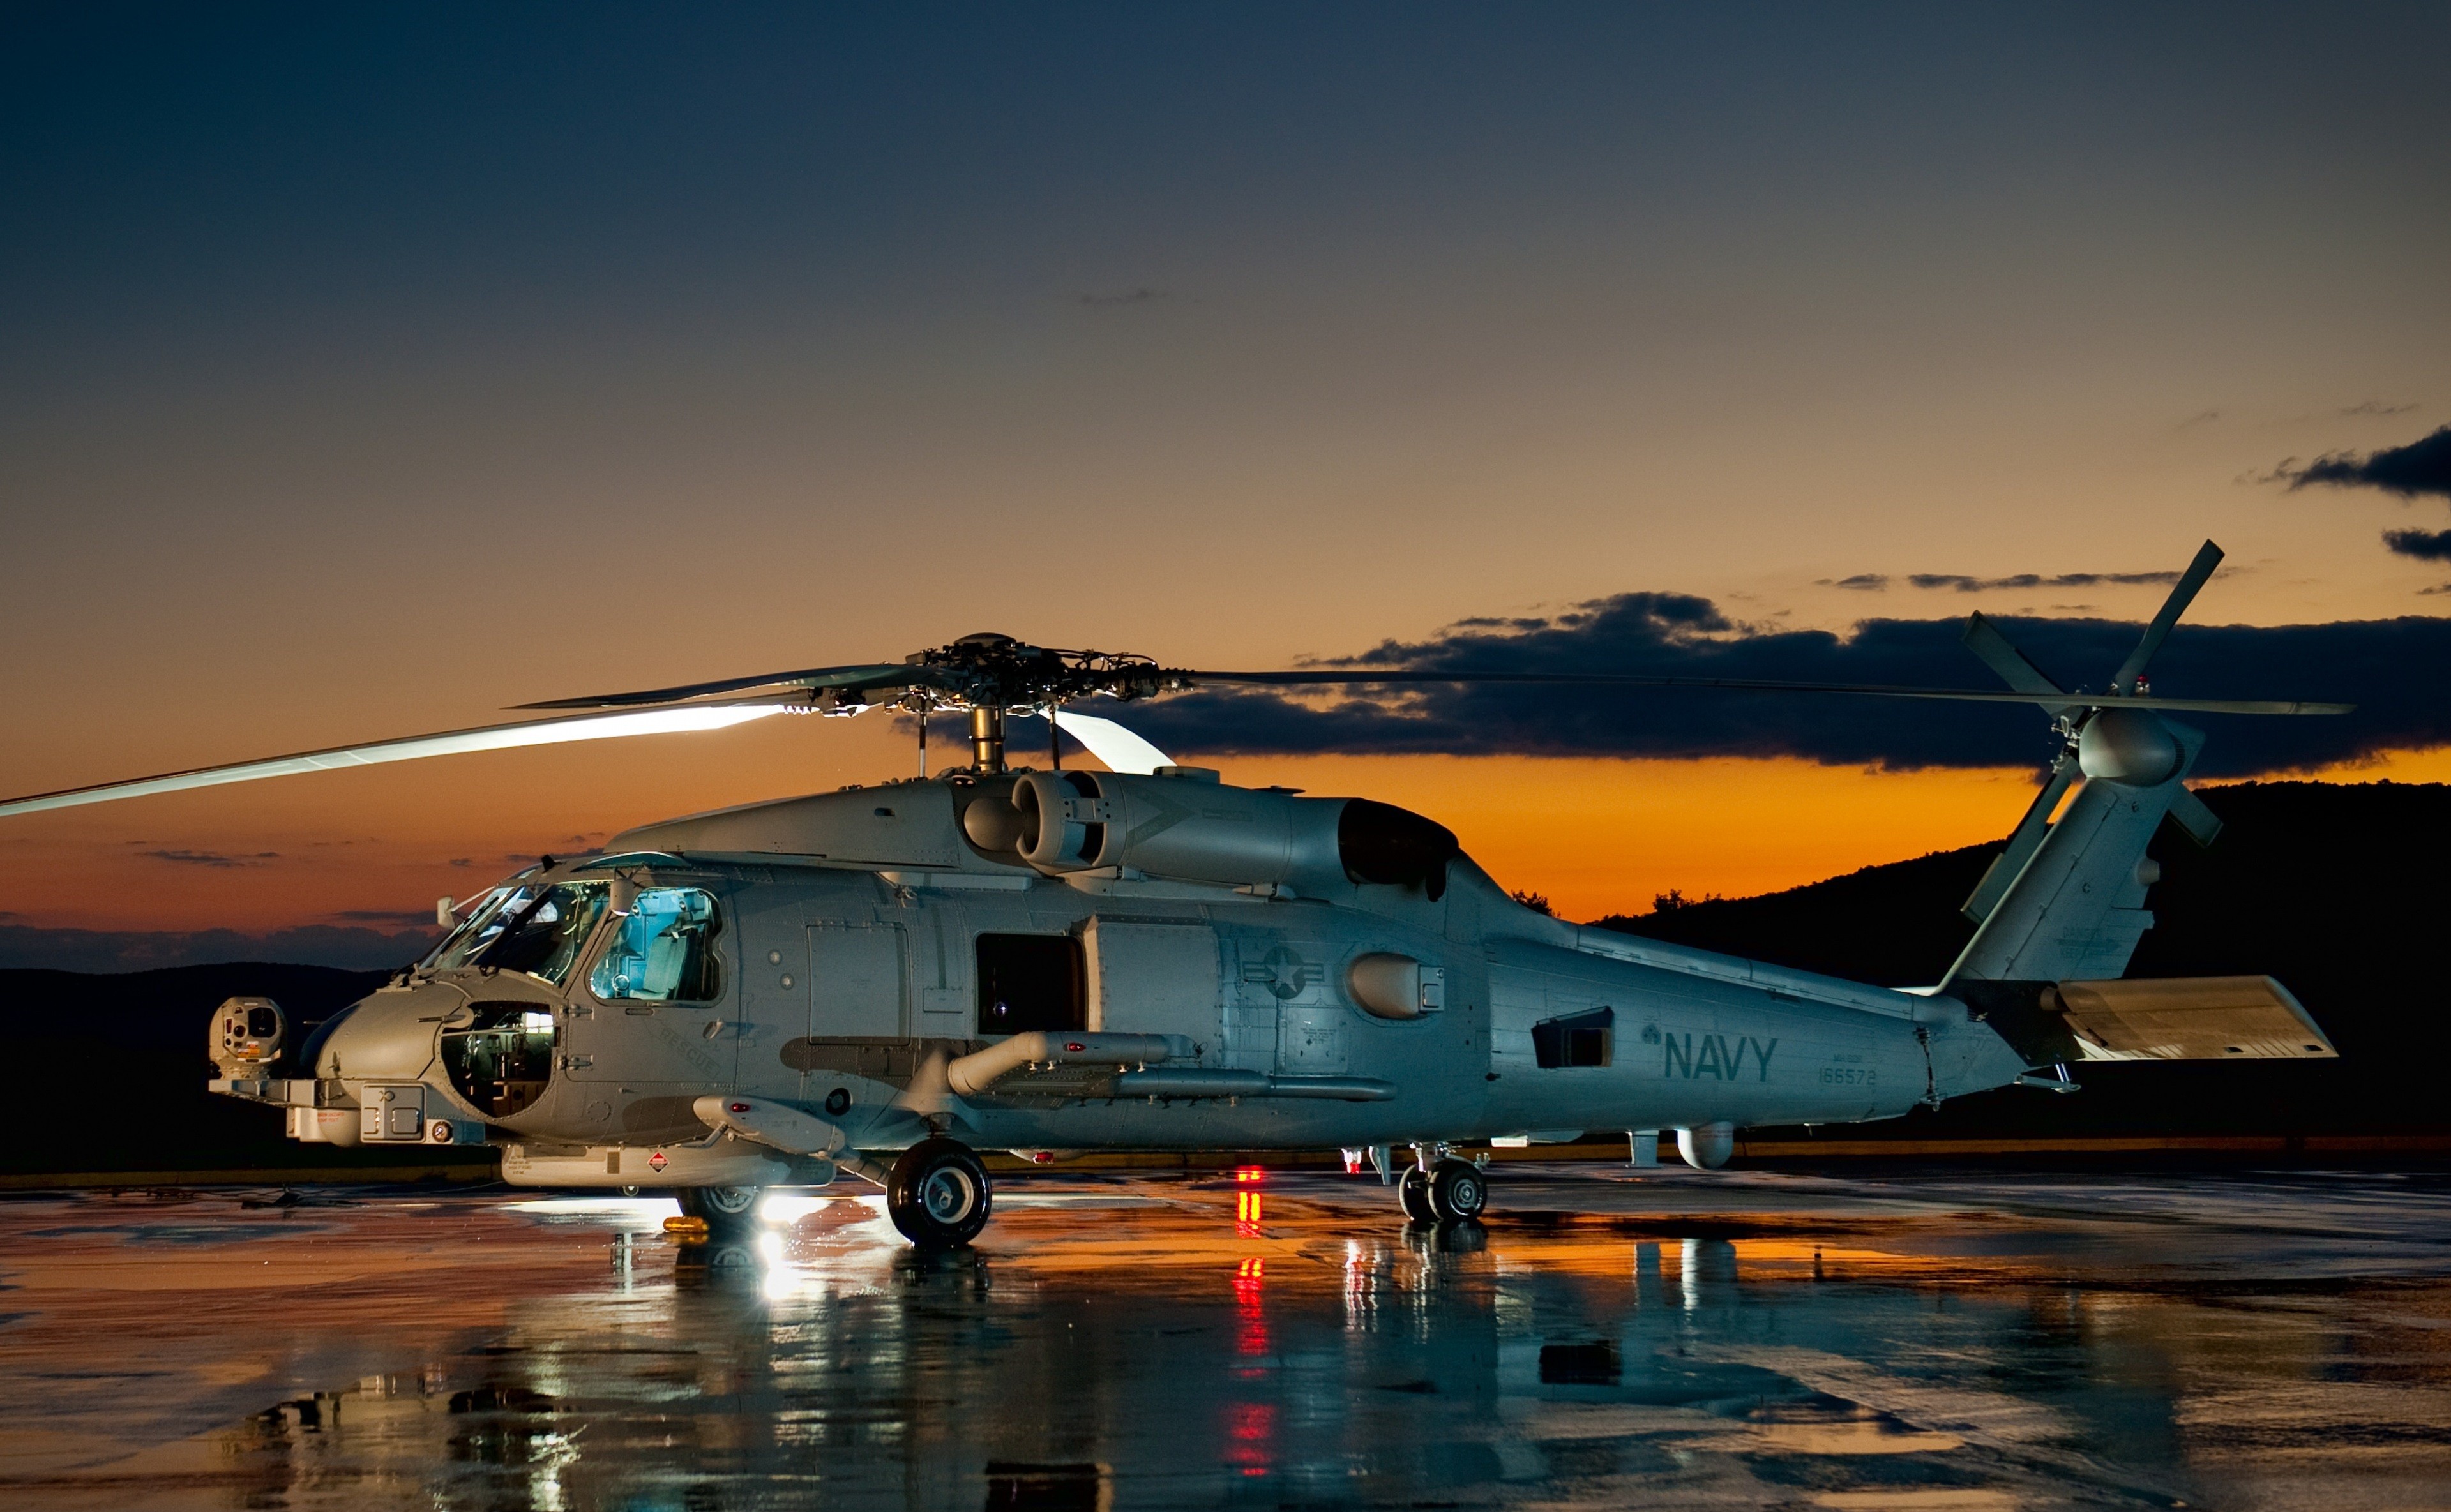 Photography Helicopters United States Navy Dusk Sikorsky UH 60 Black Hawk 3839x2369